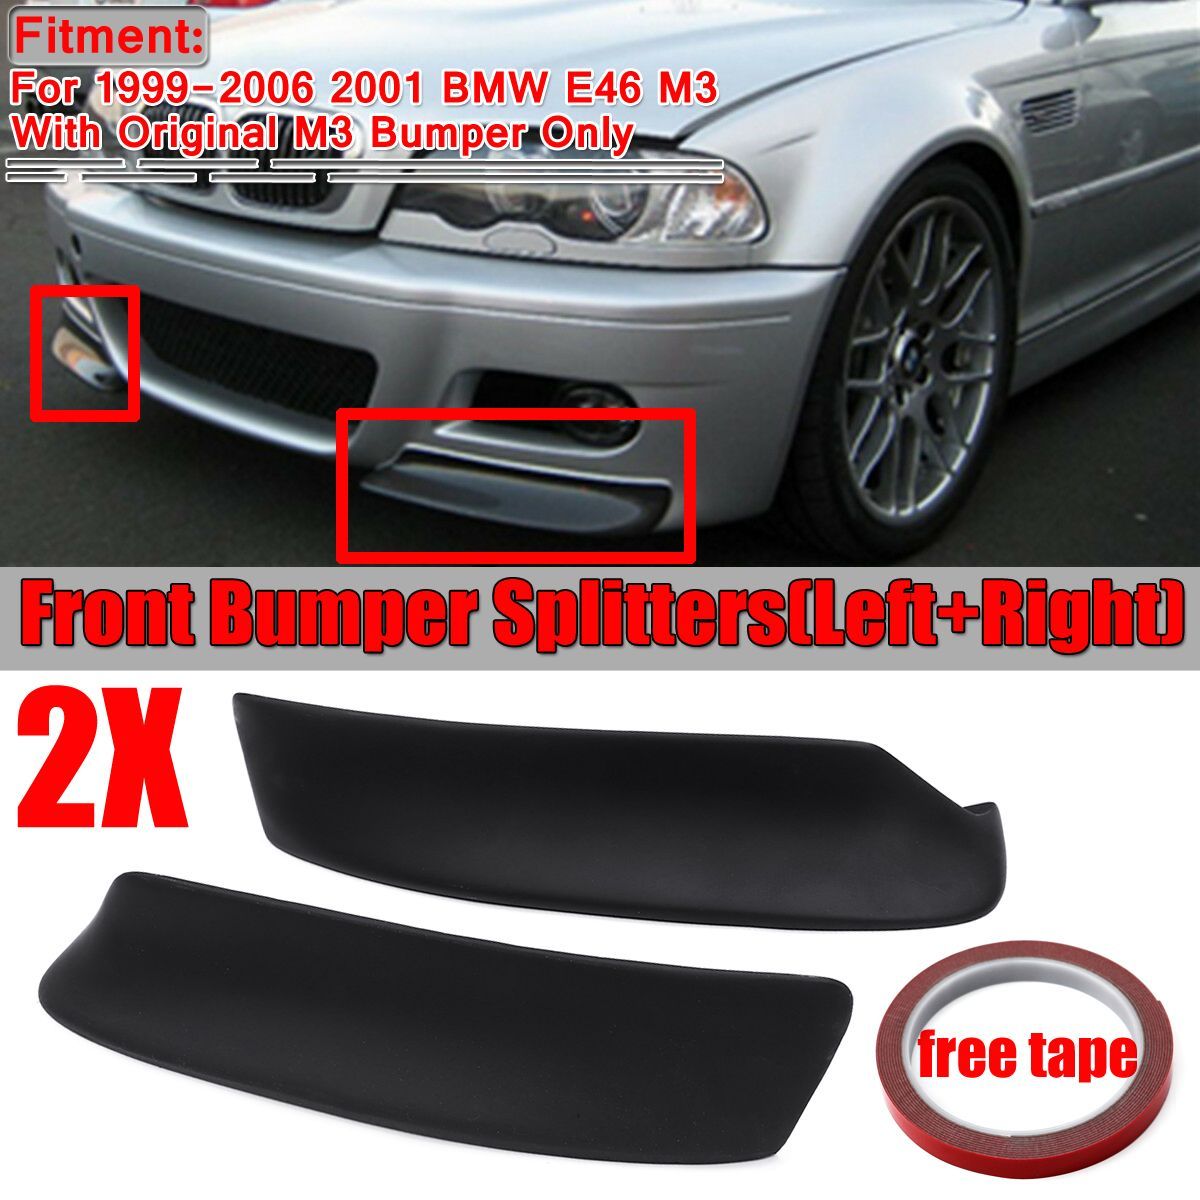 Front-Bumper-Splitters-Protector-LeftRight-Black-CSL-Style-For-BMW-E46-M3-1999-2006-2001-1602076